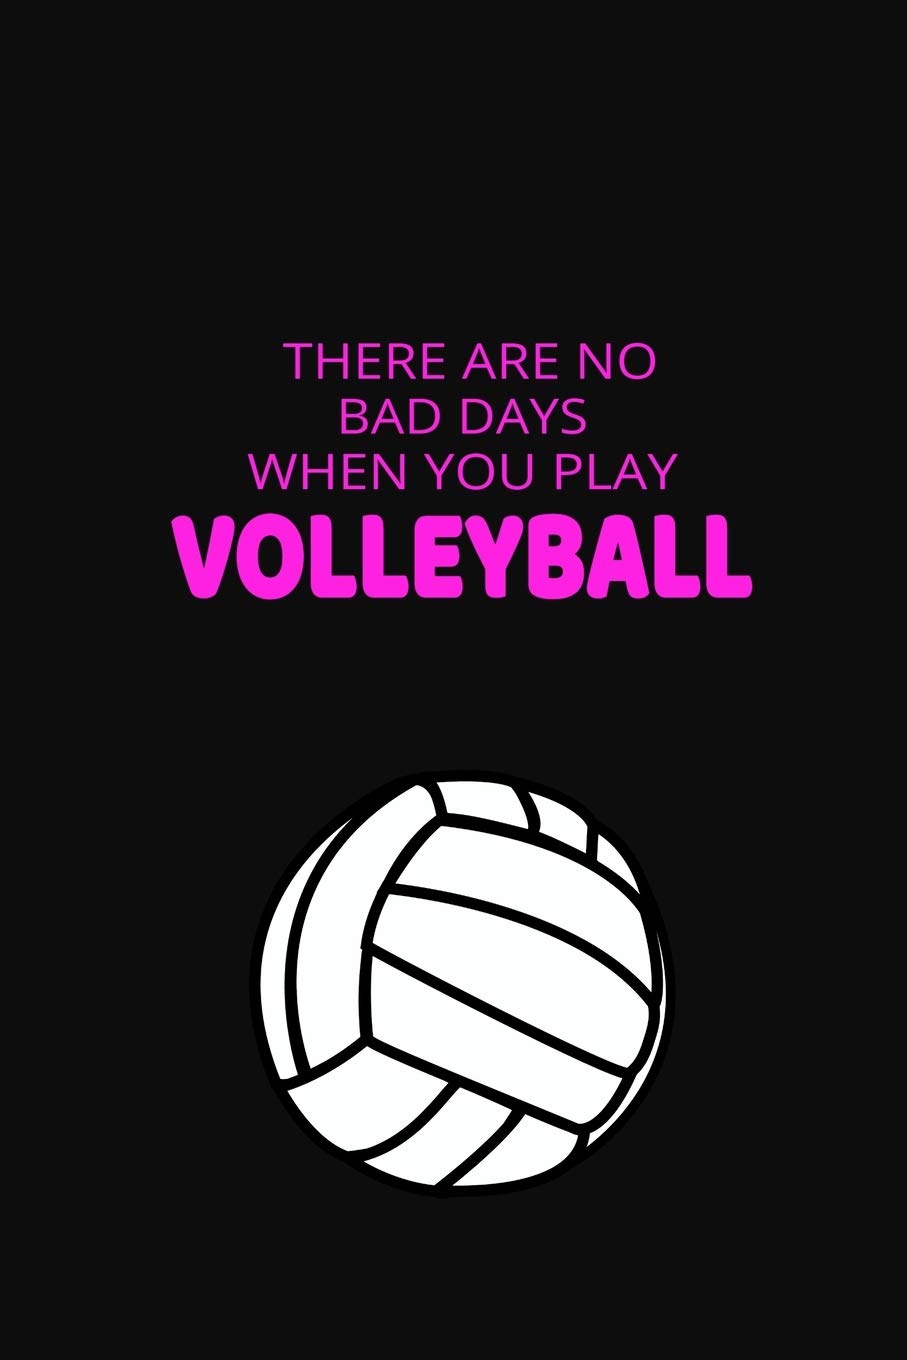 Buy There Are No Bad Days When You Play Volleyball: Cute Volleyball Notebook & Journal, Girl's Volleyball Gift, ( 110 Lined Pages x 9 ), Use as a. Girls